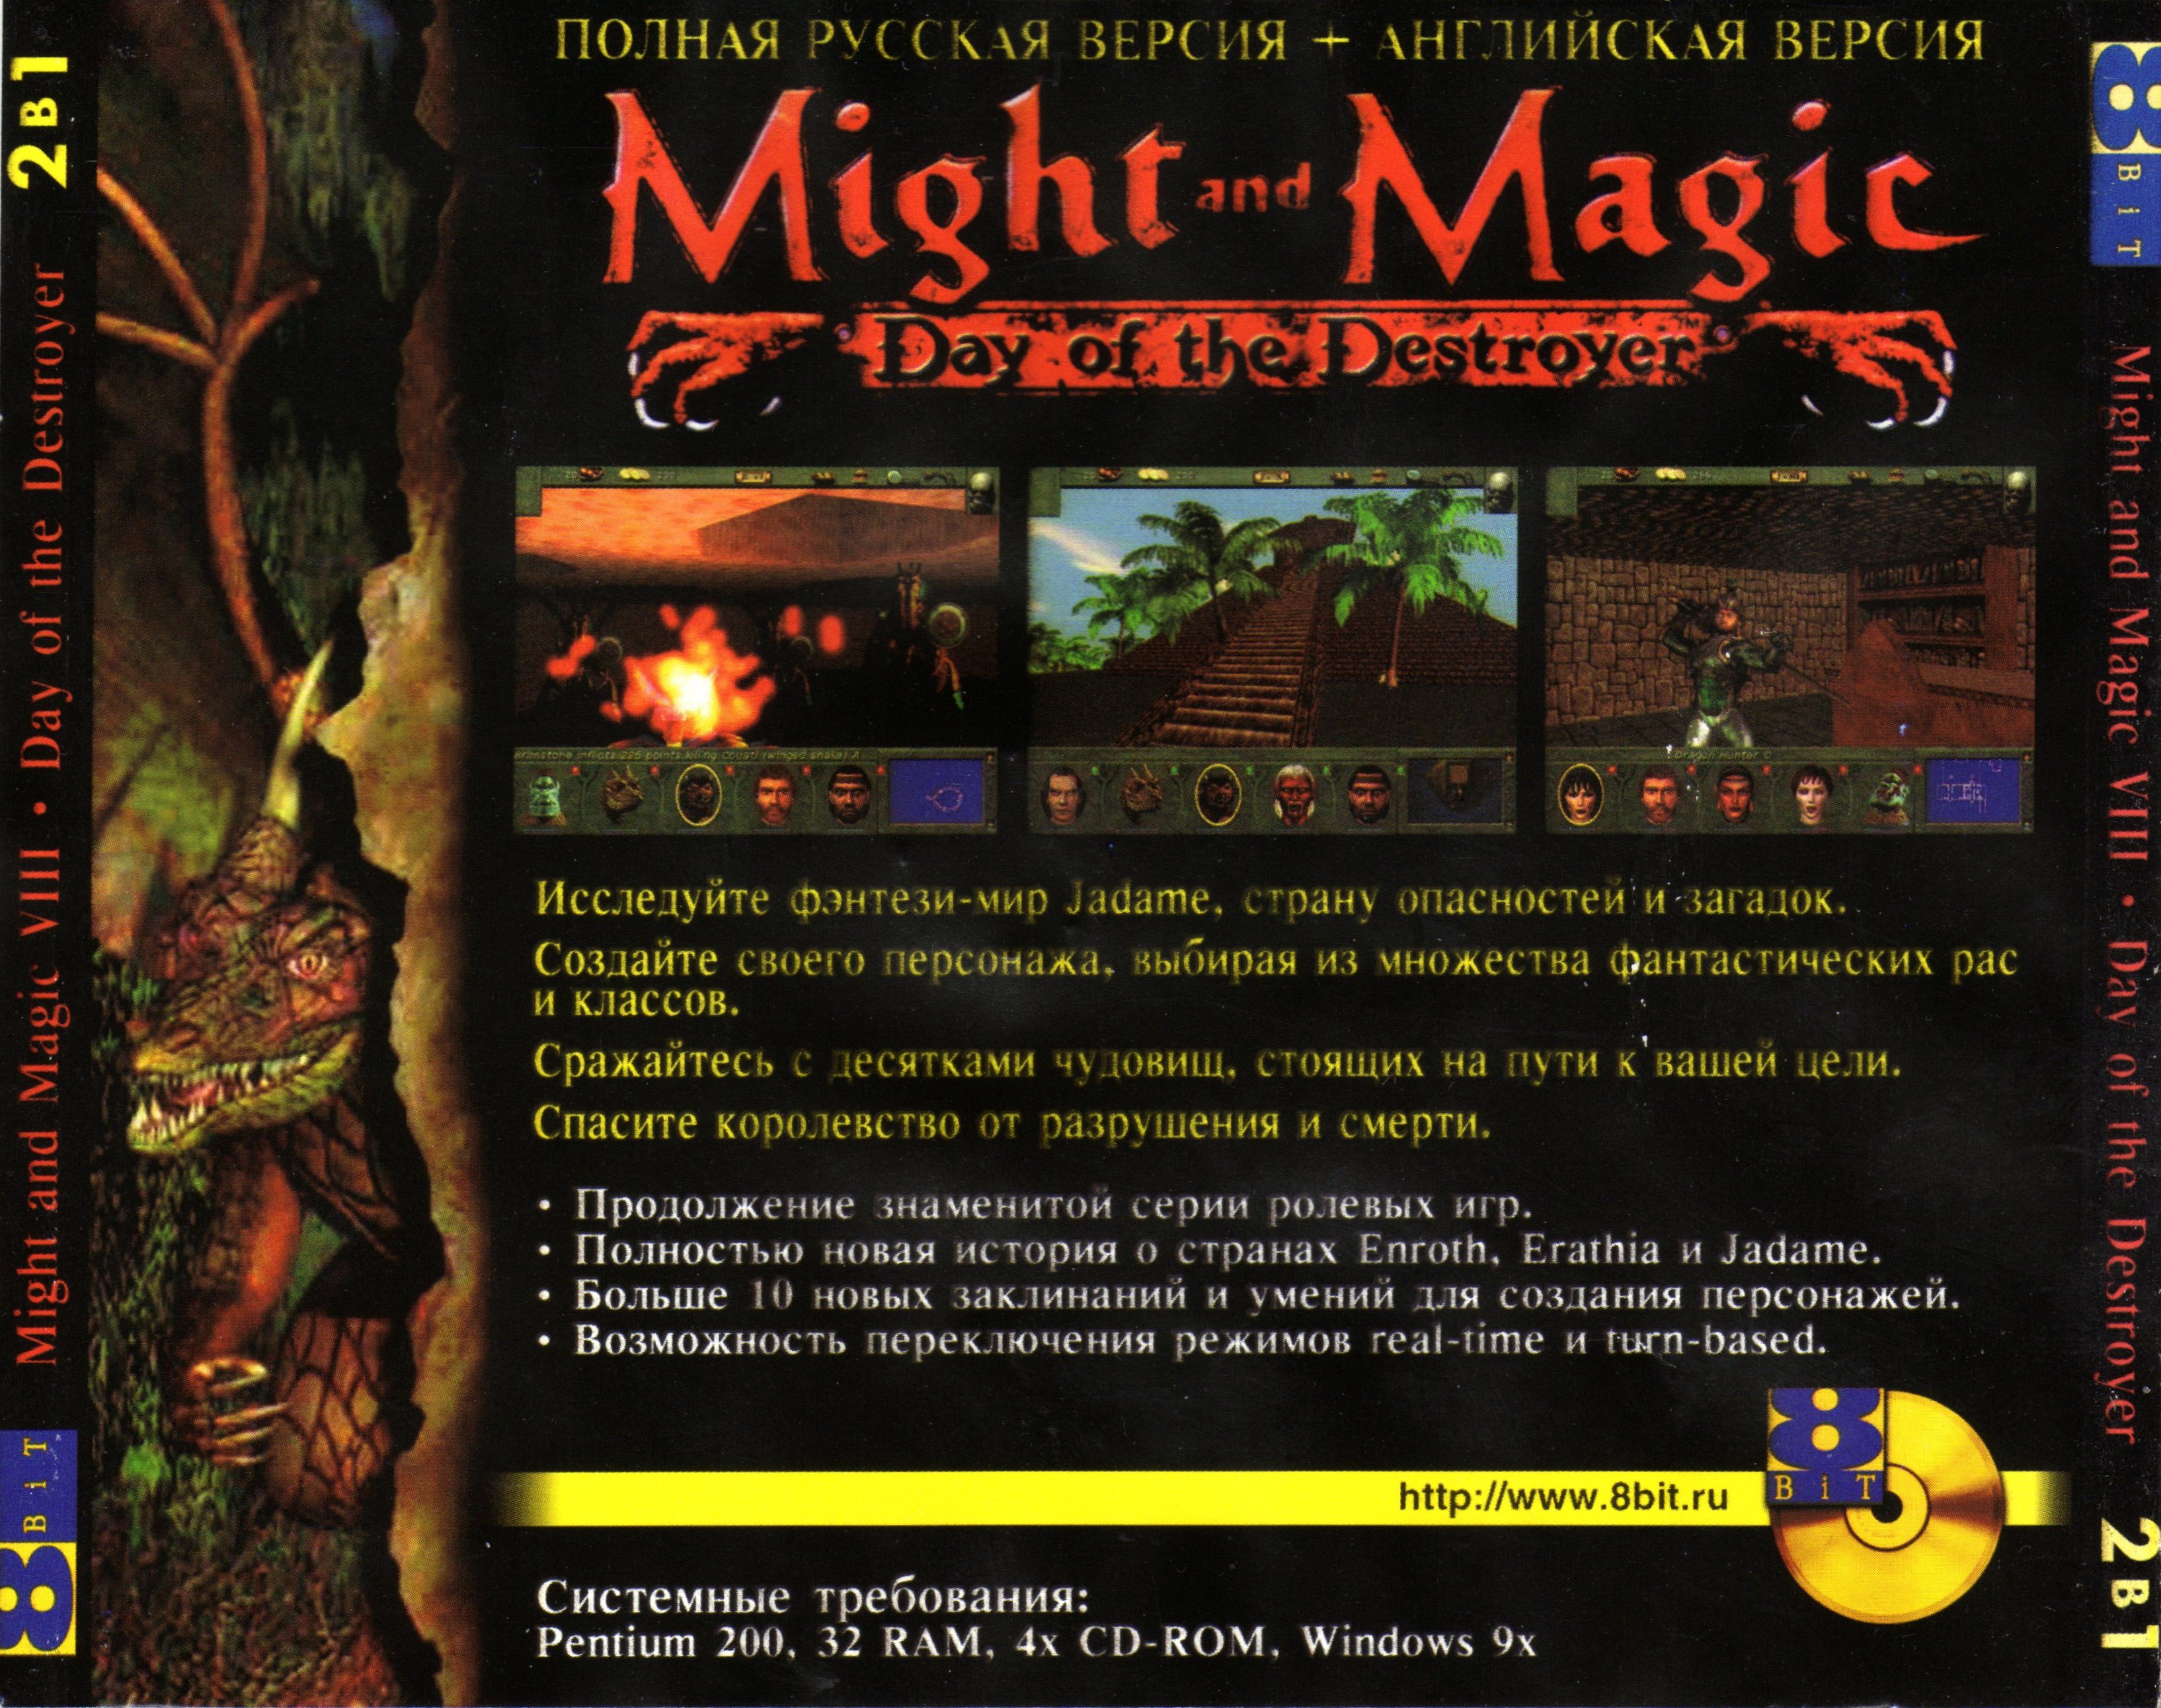 Might and magic day of the destroyer. Might and Magic VIII Day of the Destroyer. Might and Magic 8 Day of the Destroyer. Might and Magic VIII карточная игра.